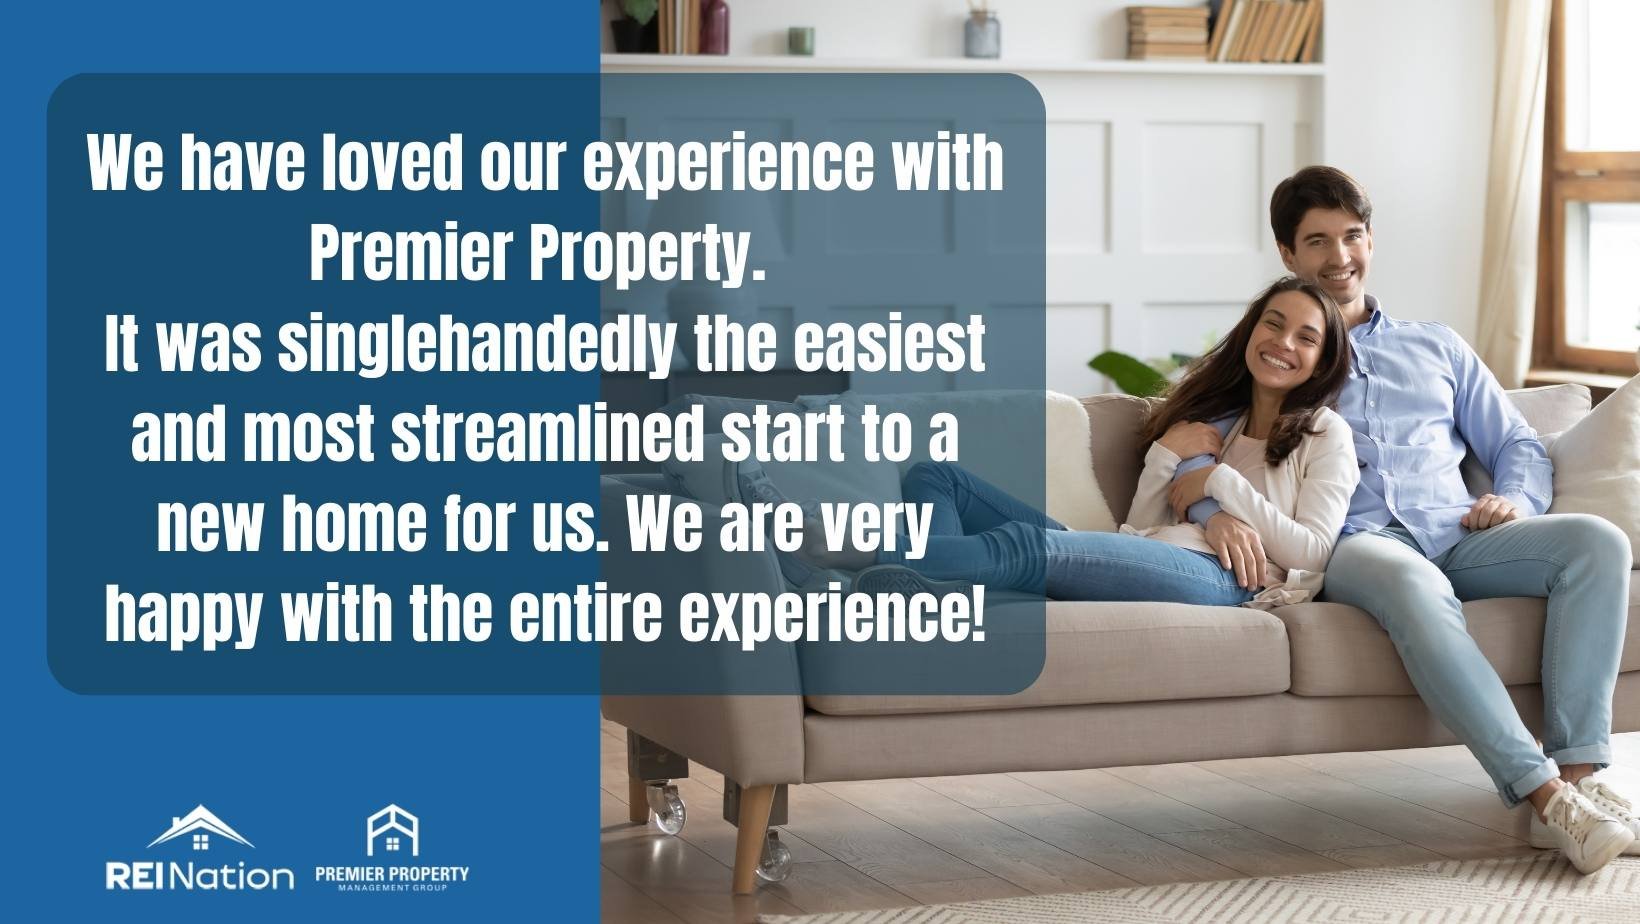 Resident response: We have loved our experience with Premier Property.  It was singlehandedly the easiest and most streamlined start to a new home for us. We are very happy with the entire experience!